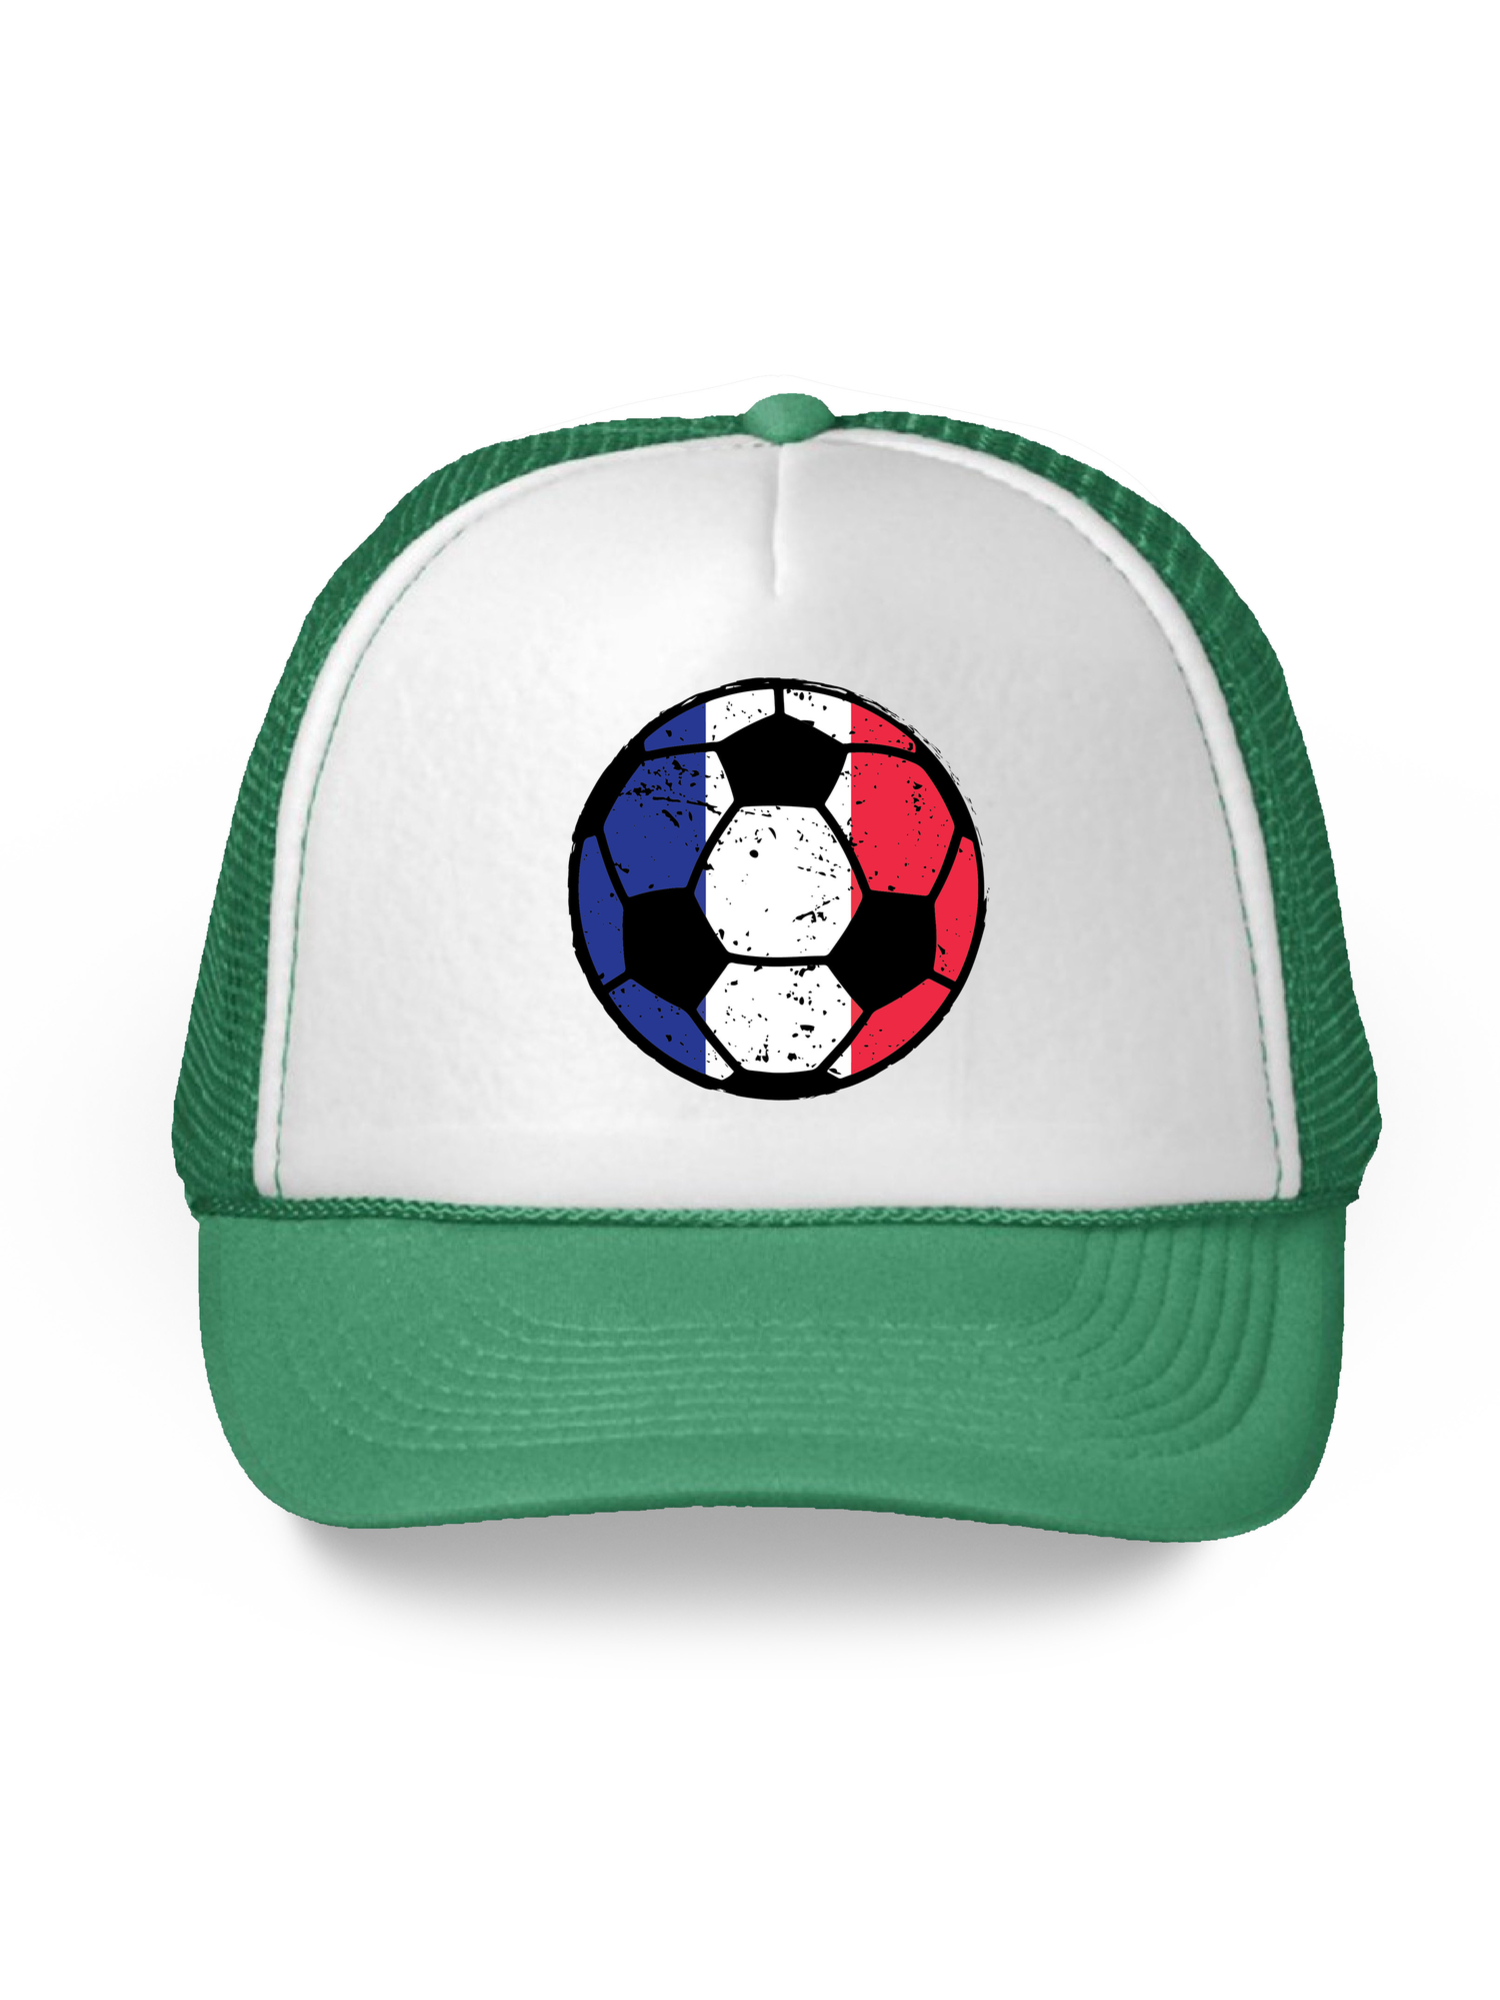 Awkward Styles France Soccer Ball Hat French Soccer Trucker Hat France 2018 Baseball Cap France Trucker Hats for Men and Women Hat Gifts from France French Baseball Hats French Flag Trucker Hat - image 1 of 6